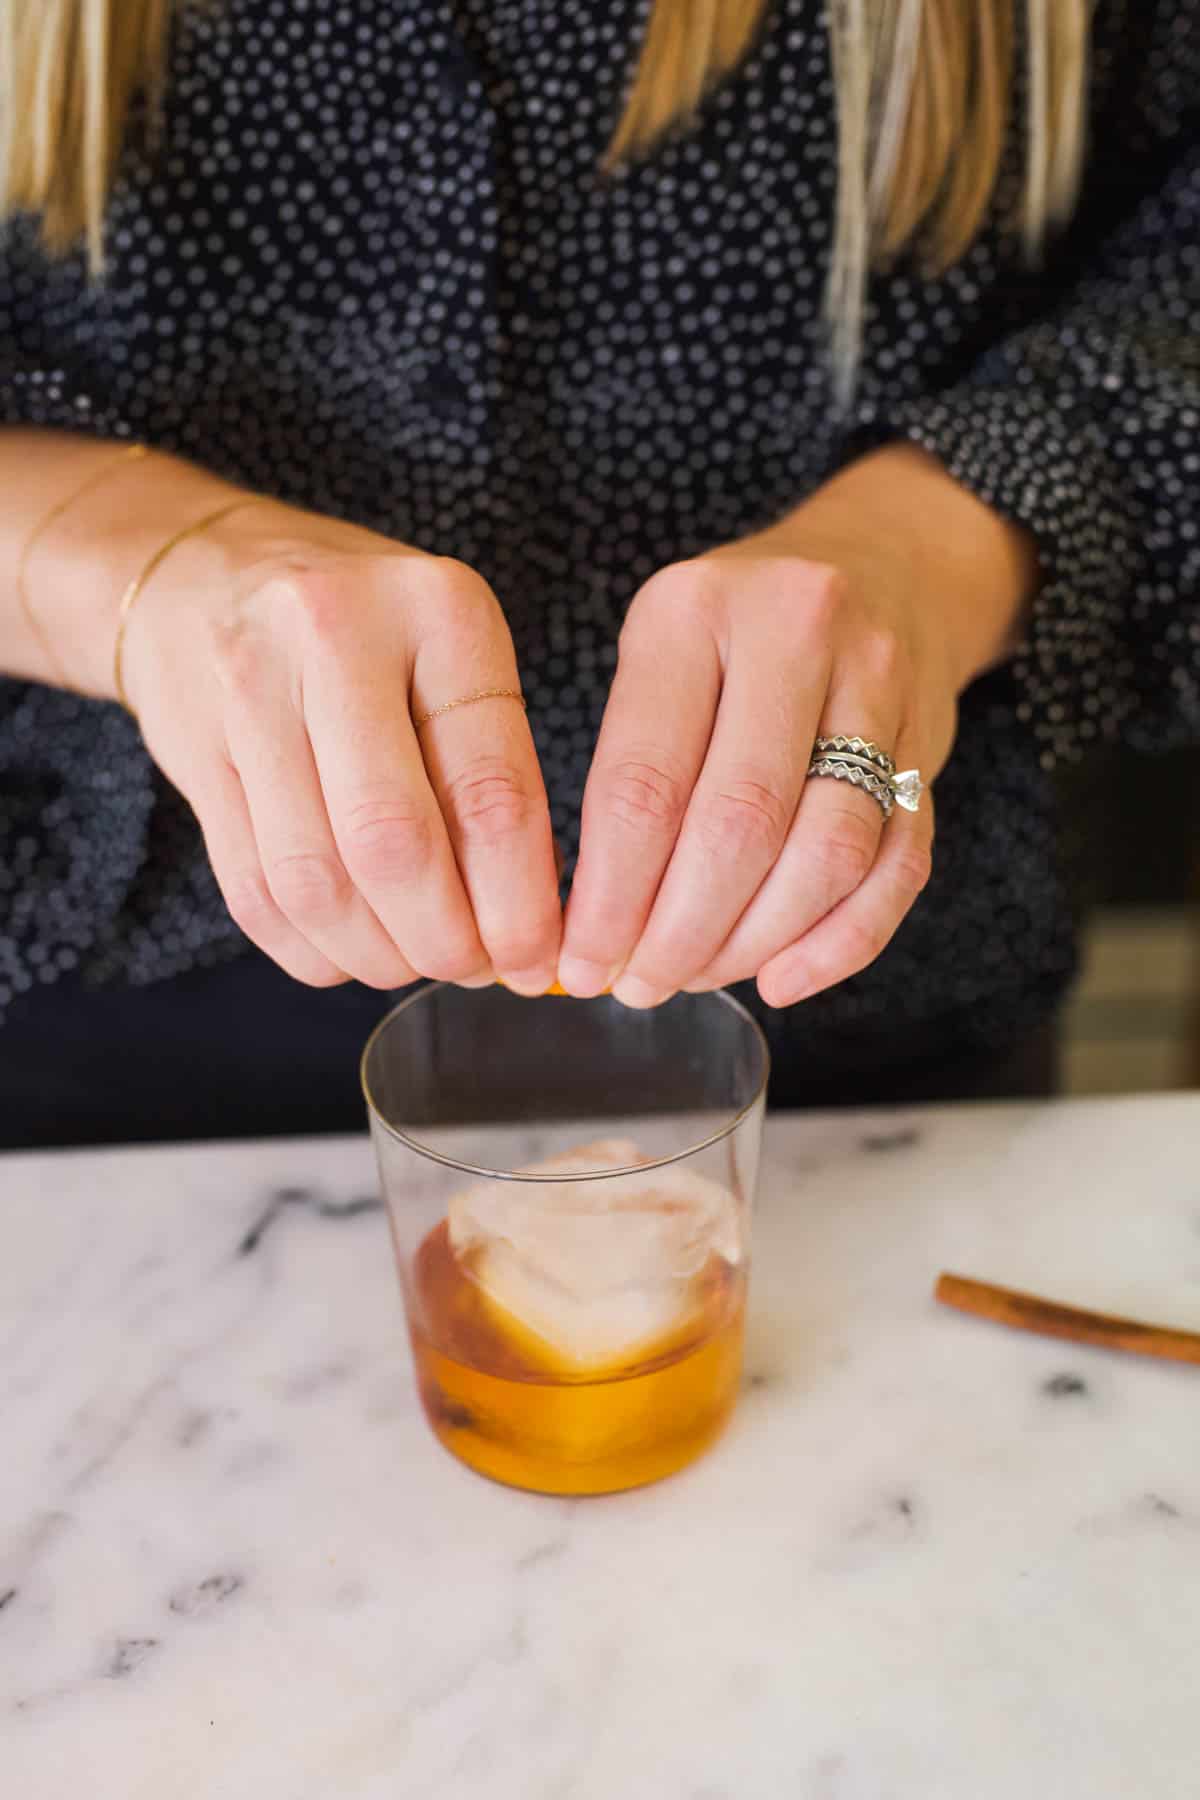 Woman squeezing an orange peel over the top of a Fireball Old Fashioned.